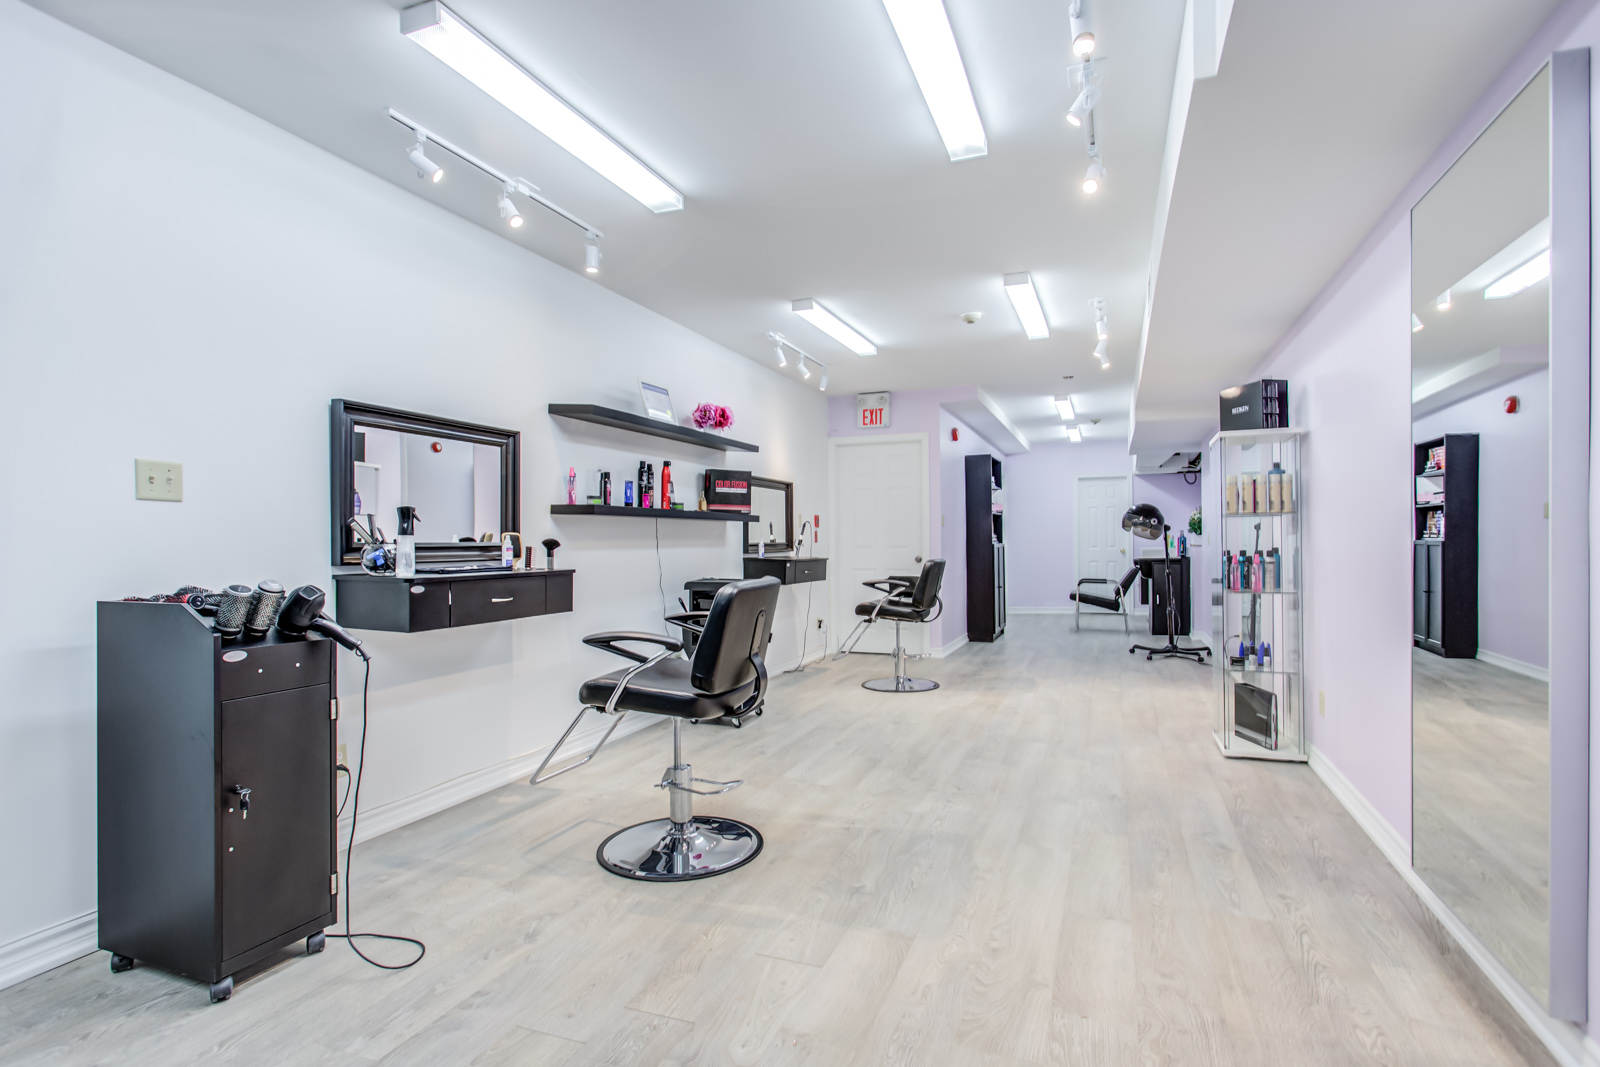 Photo of hair salon inside with everything ready for business.